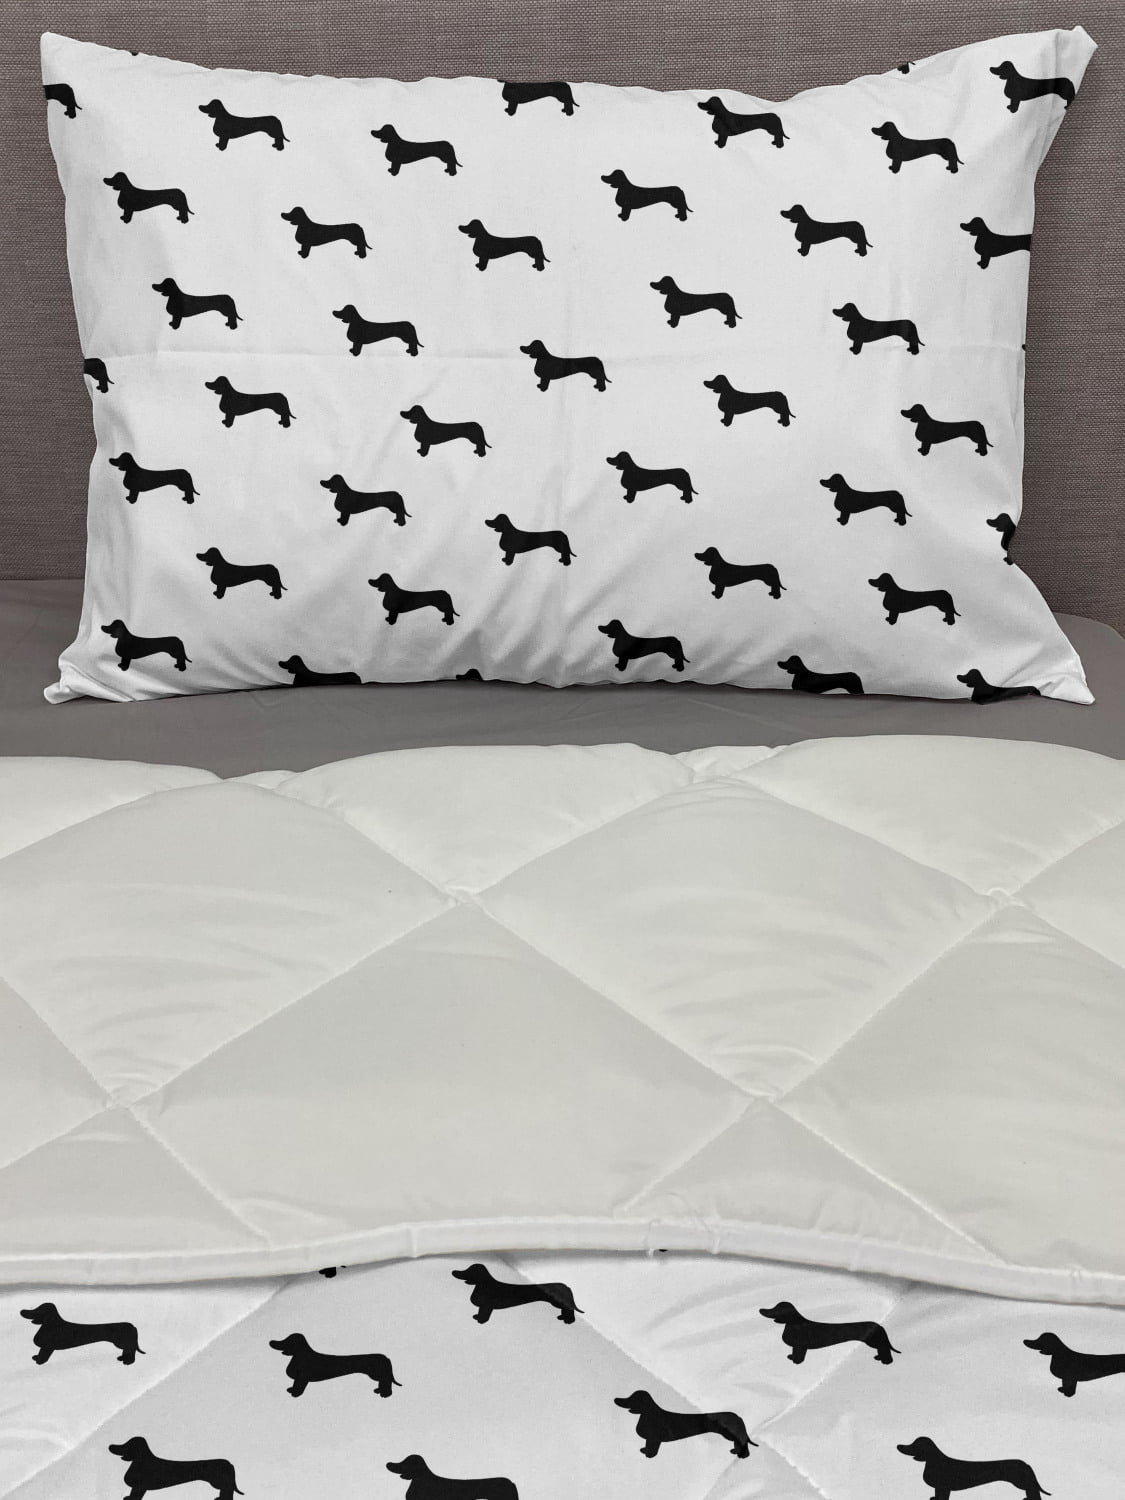 Dachshund Silhouette Print Details about   Dog Lover Quilted Bedspread & Pillow Shams Set 